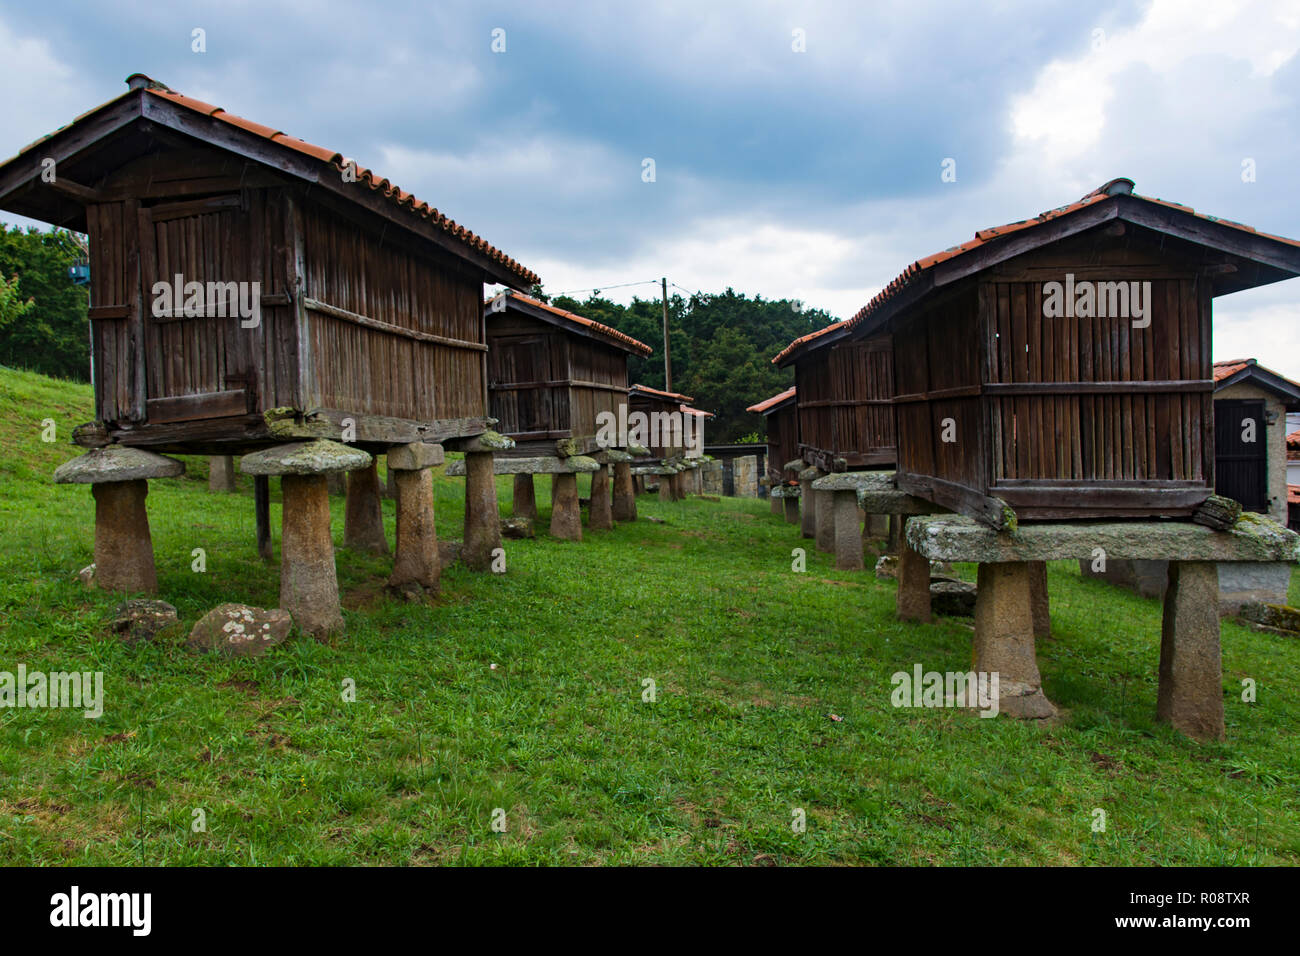 Galician hórreo construction of agricultural use destined to dry, cure and store corn and other cereals very typical in Galicia Spain Stock Photo